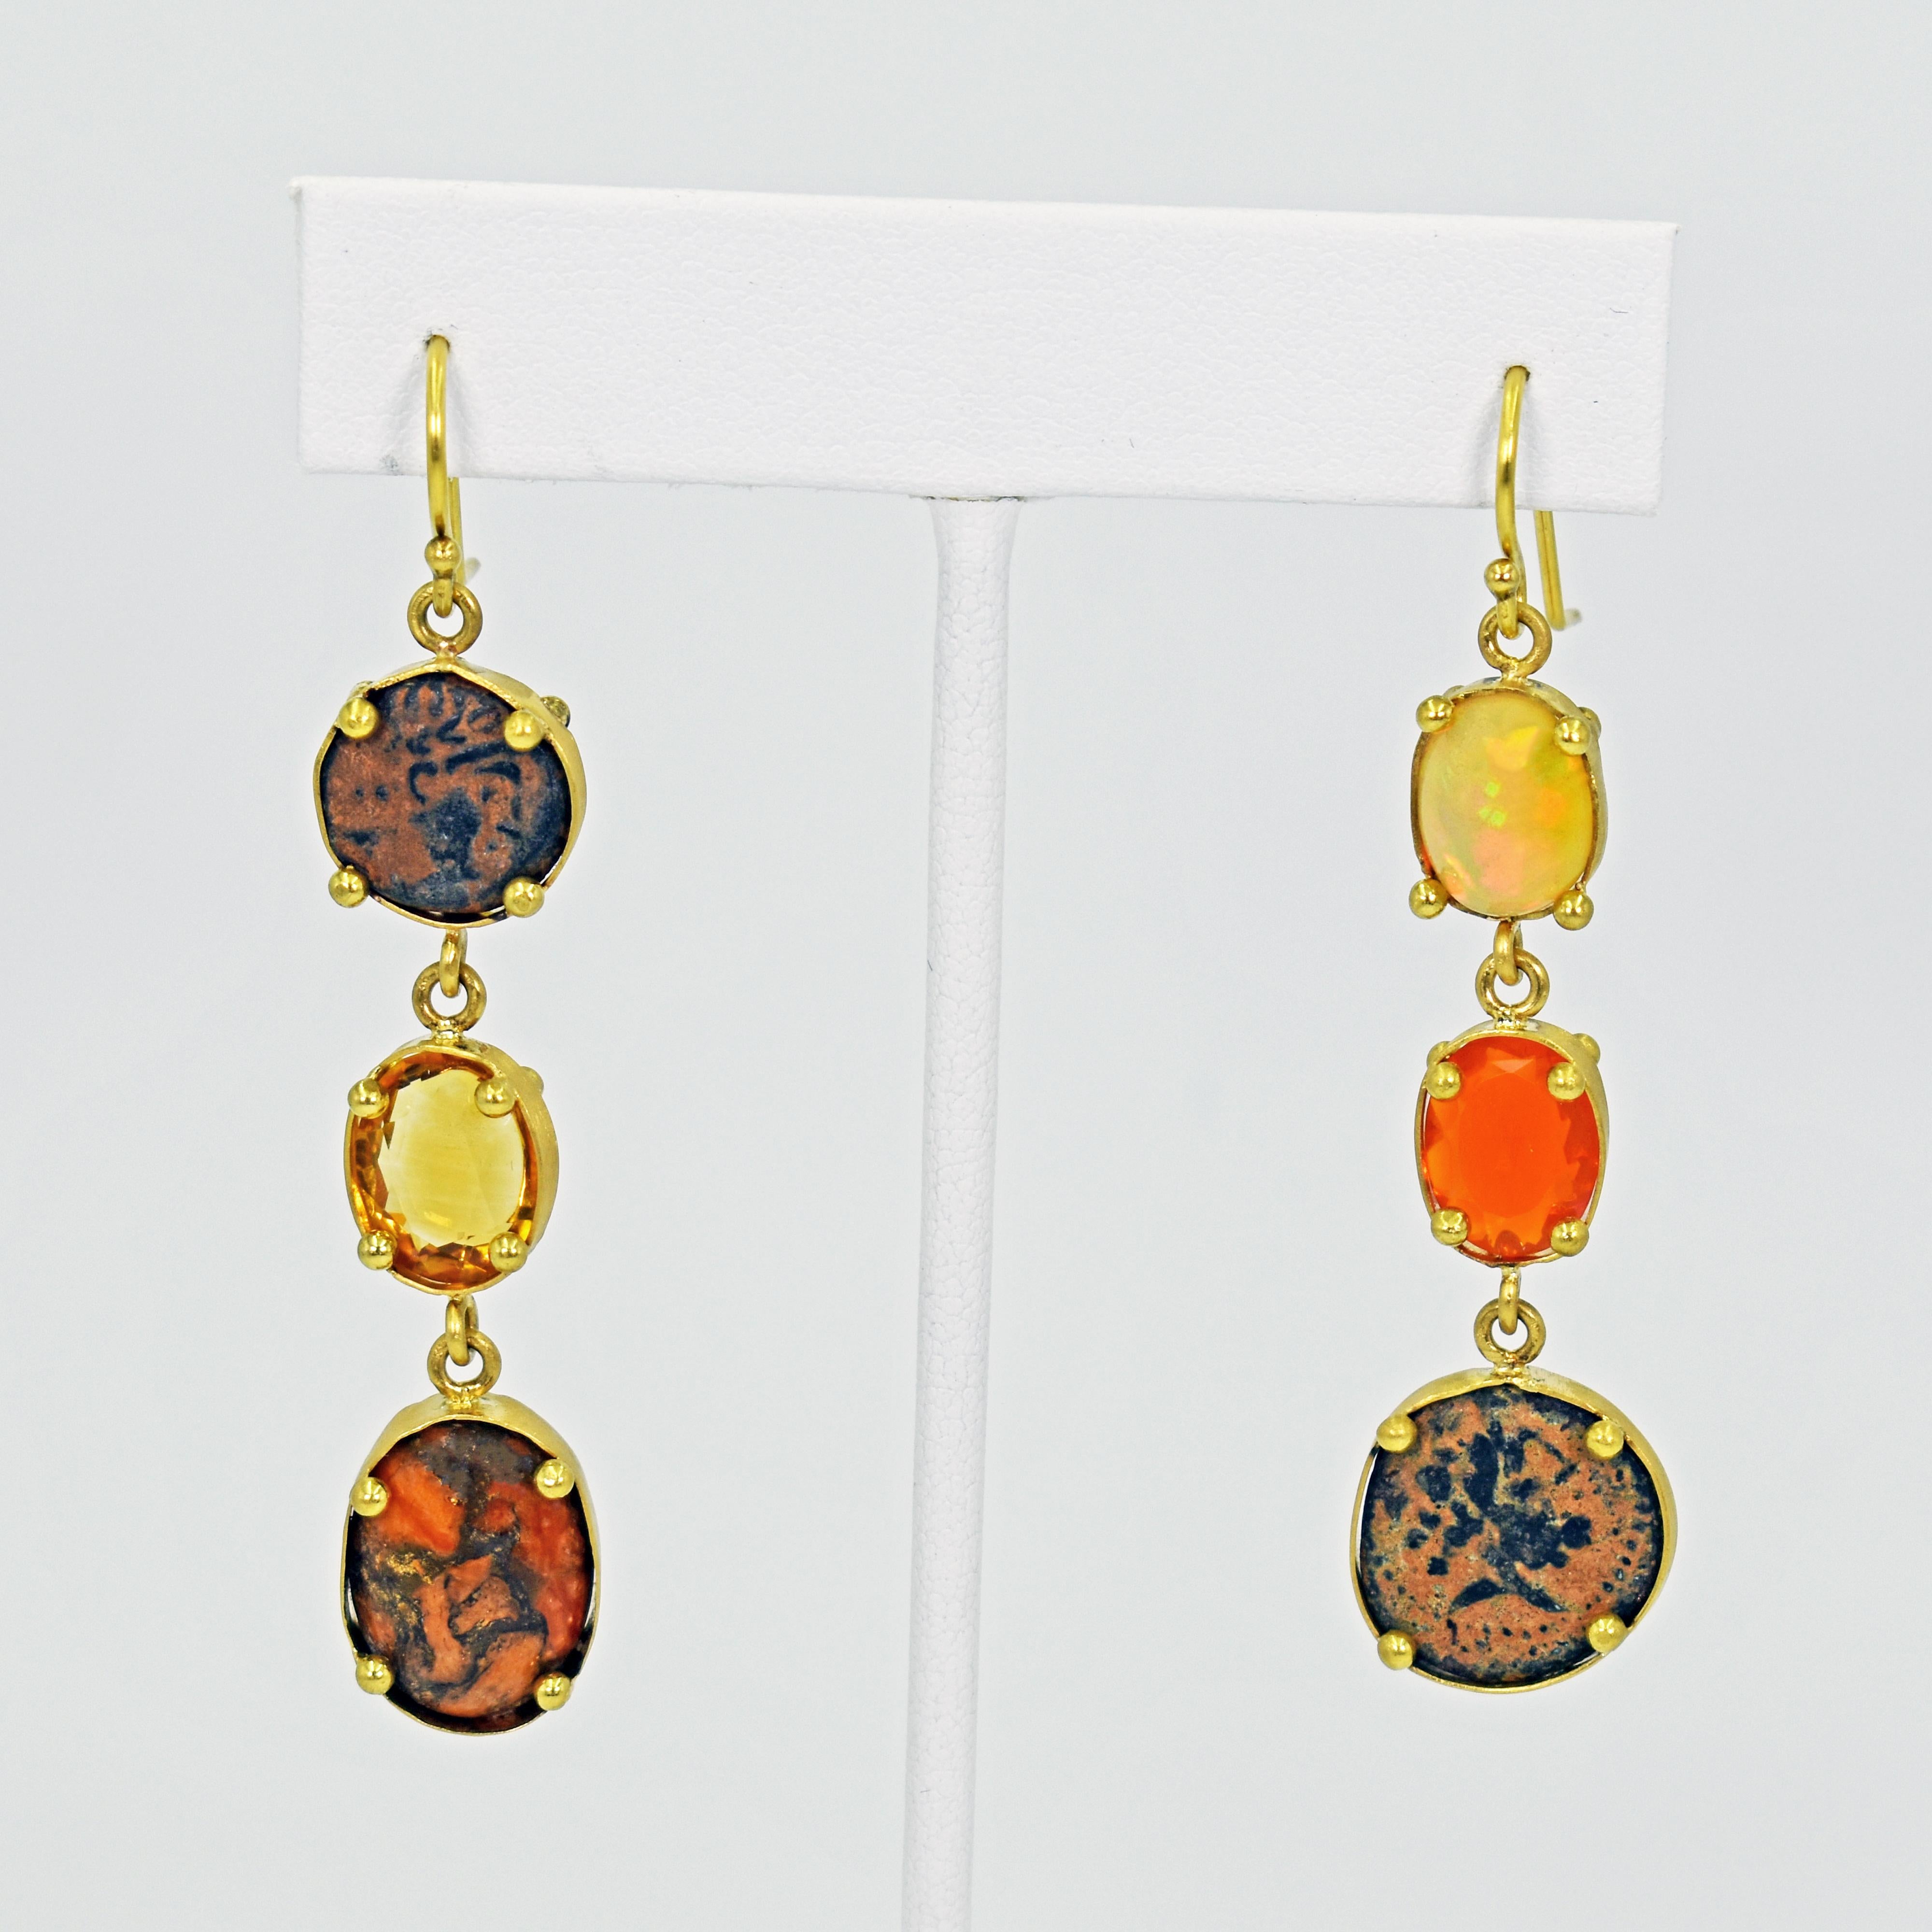 Contemporary Multi-Gemstone and Ancient Coin 22 Karat Gold Asymmetrical Dangle Earrings